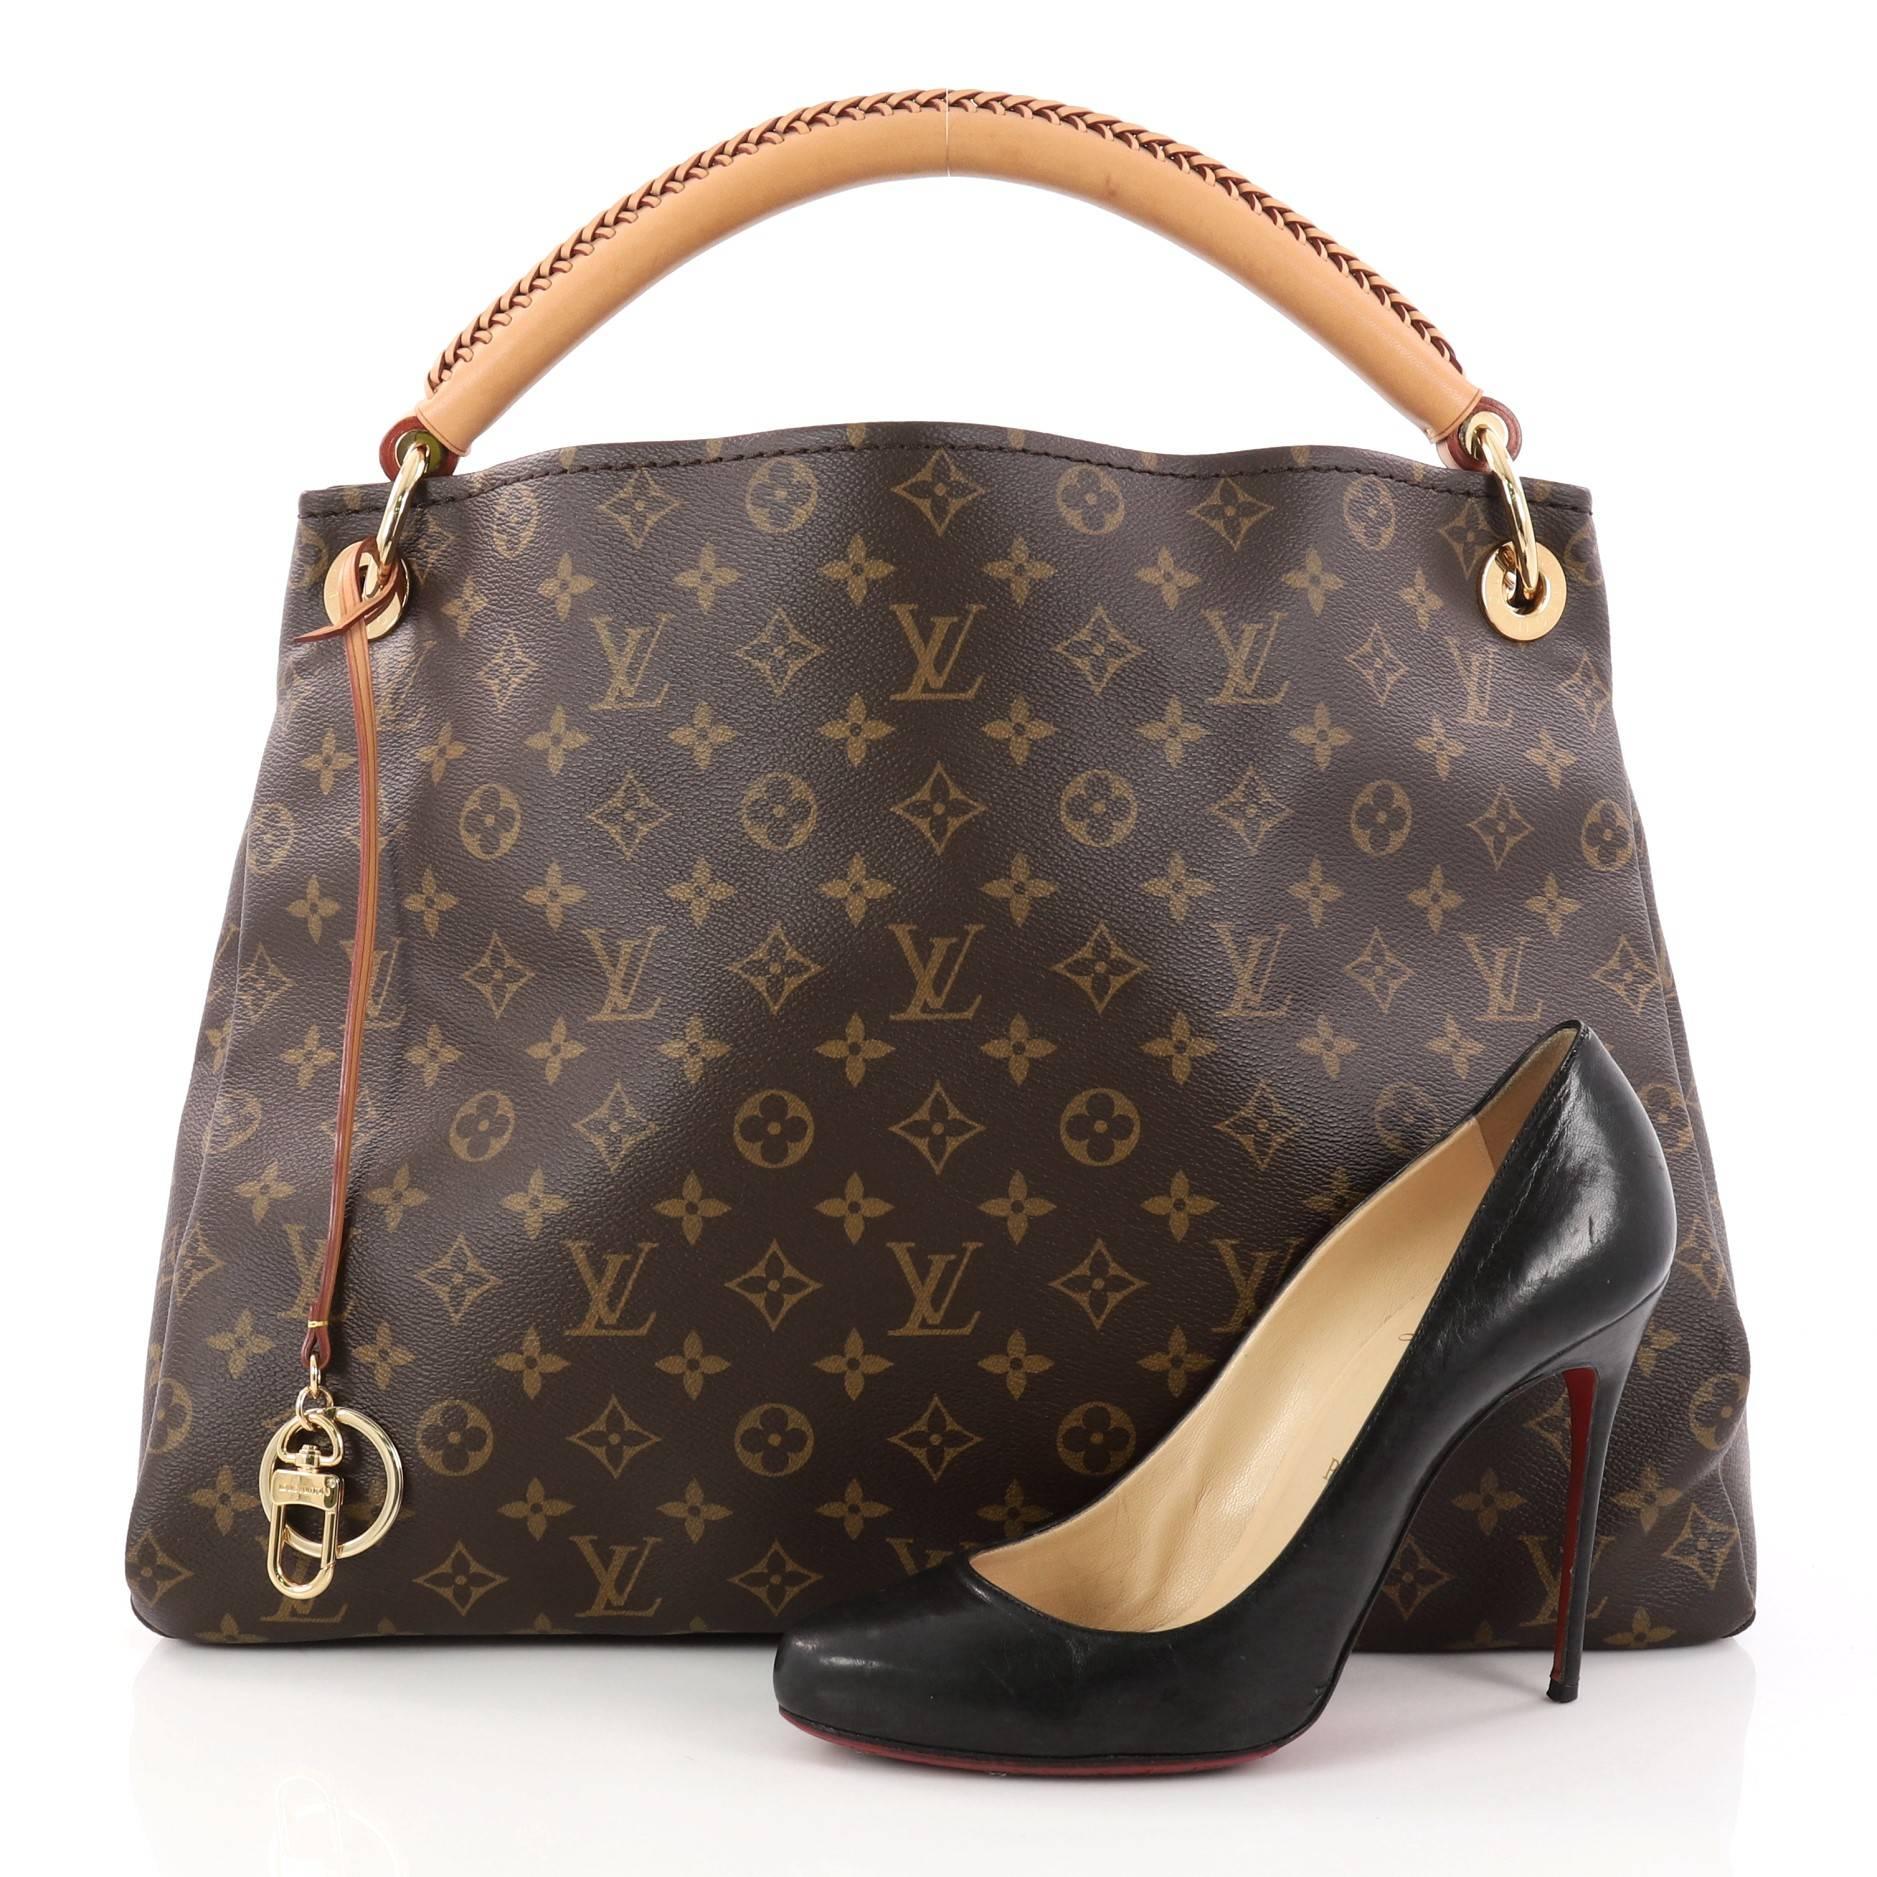 This authentic Louis Vuitton Artsy Handbag Monogram Canvas MM is an elegant and iconic bag that adds a stylish flair to any outfit. Crafted from Louis Vuitton's iconic brown monogram coated canvas, this roomy Artsy hobo features a rolled leather